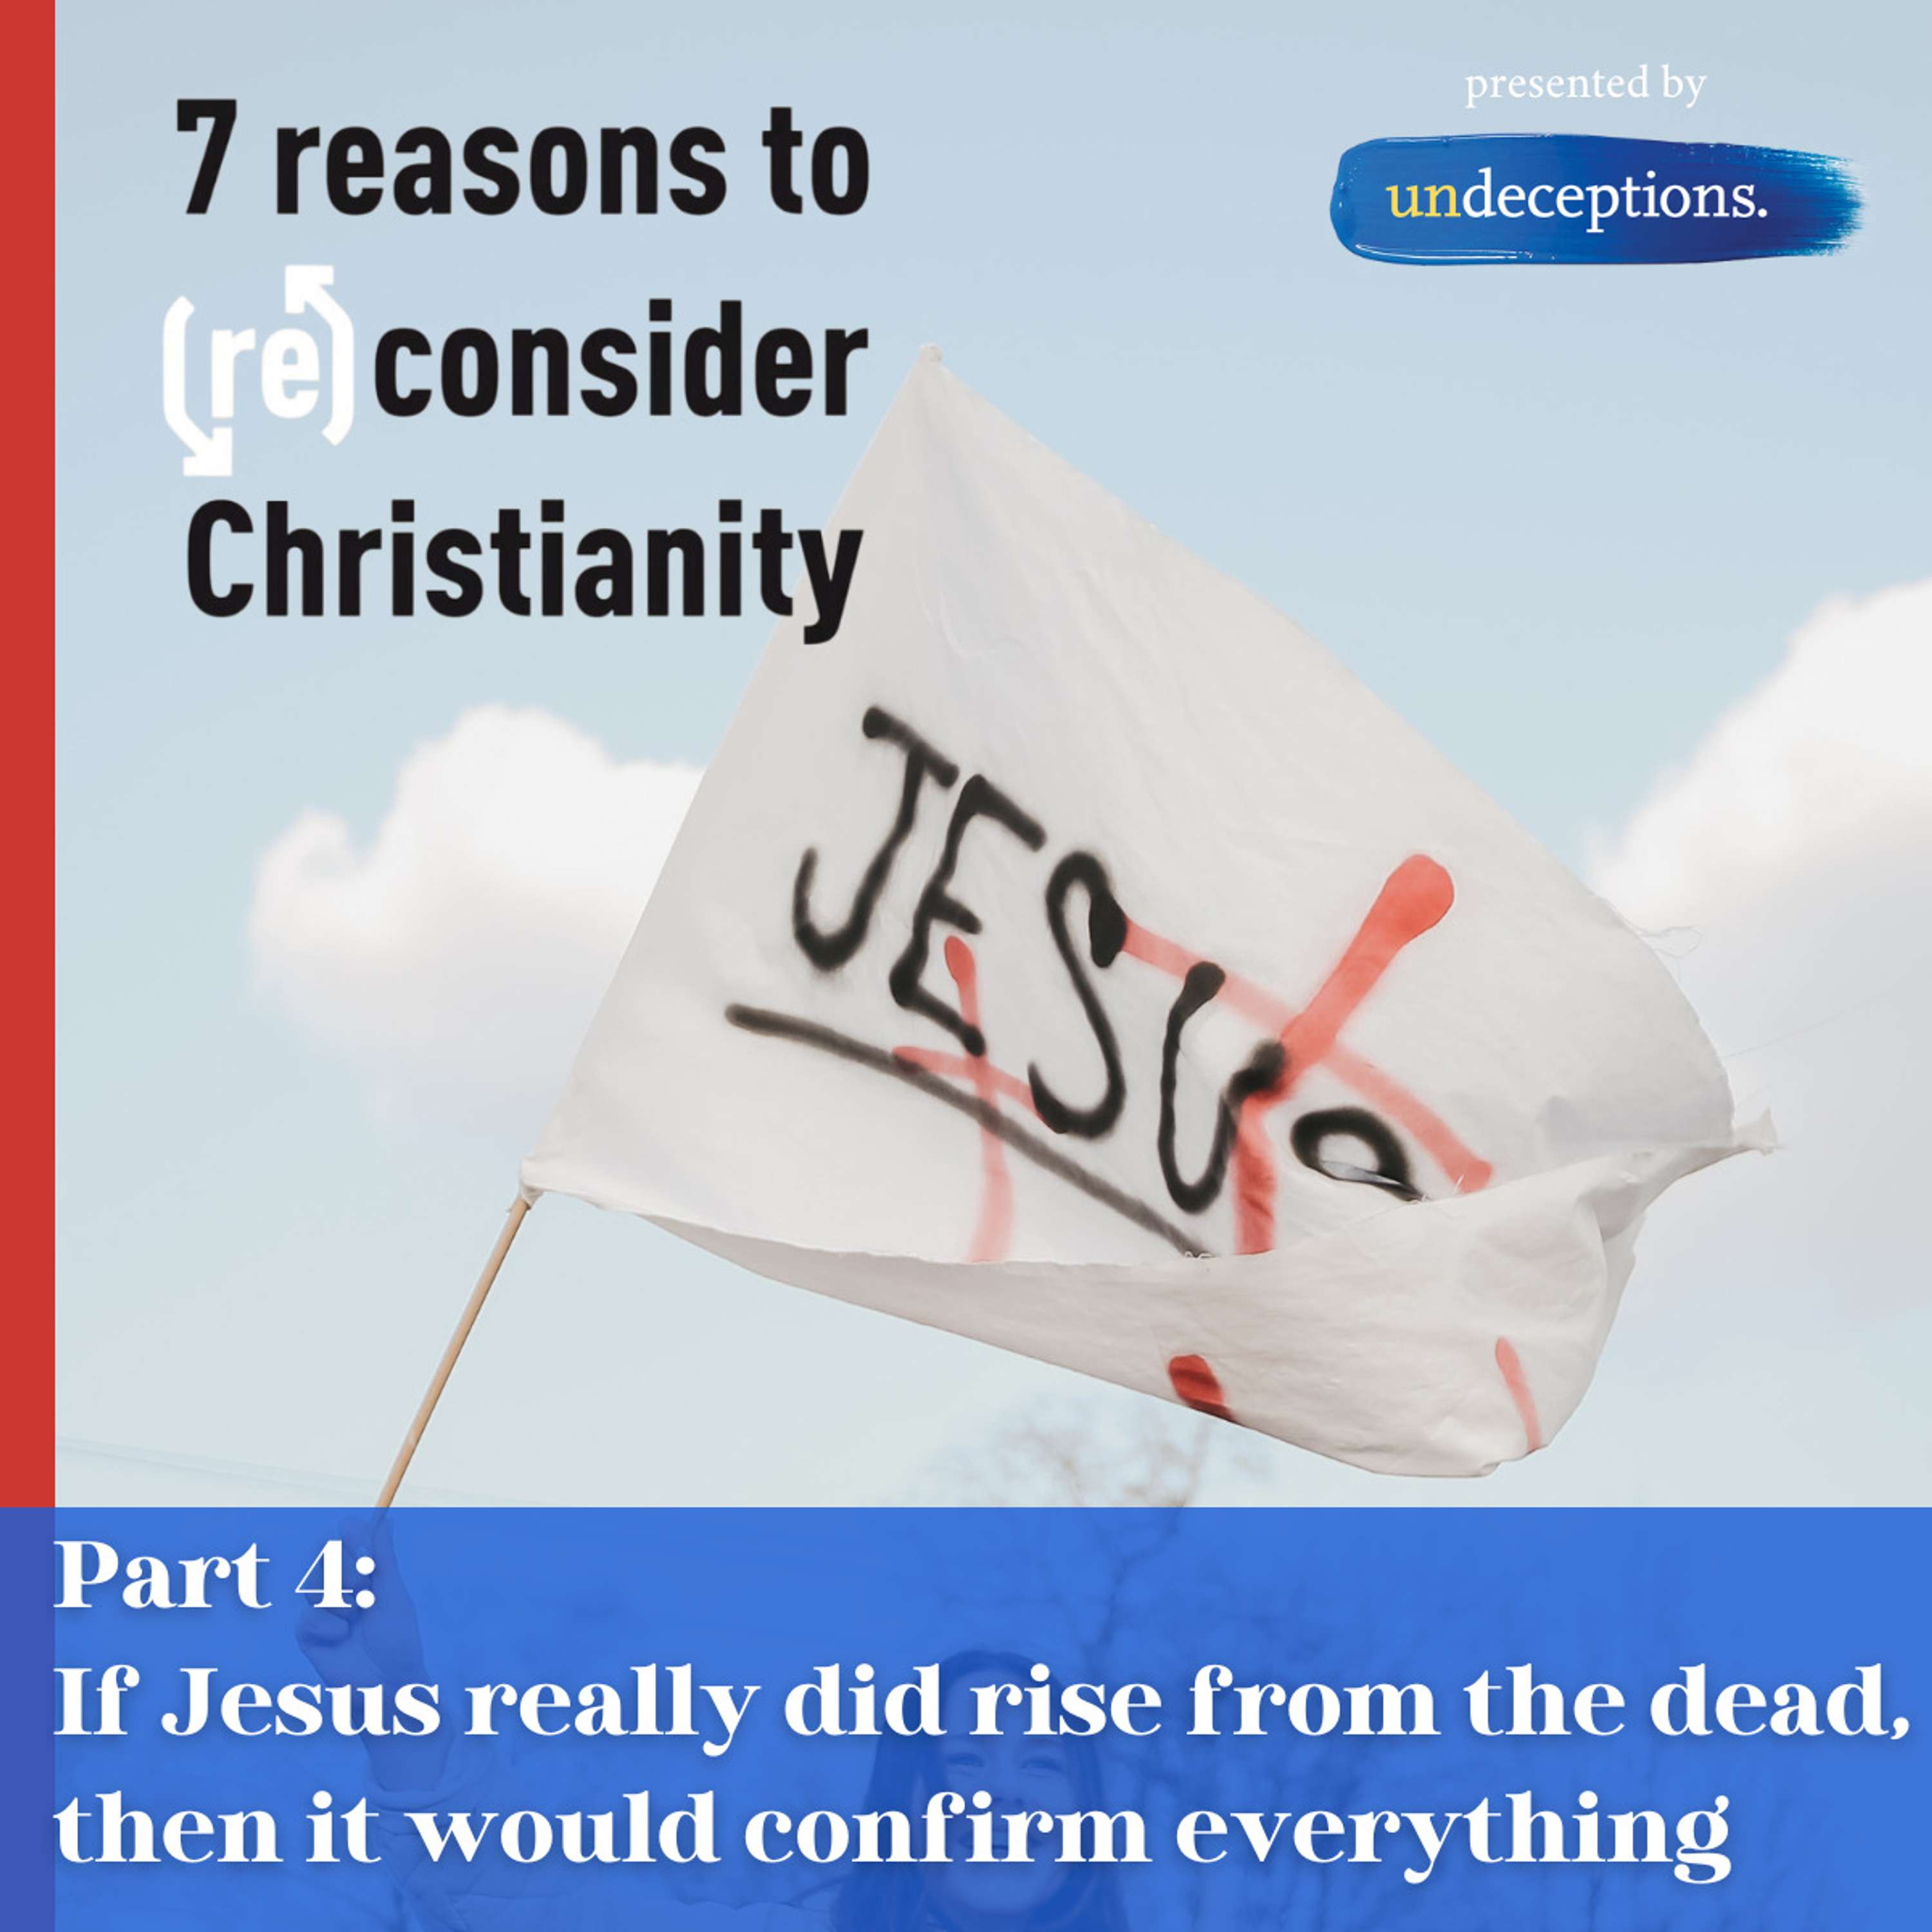 Single: If Jesus really did rise from the dead, then it would confirm everything